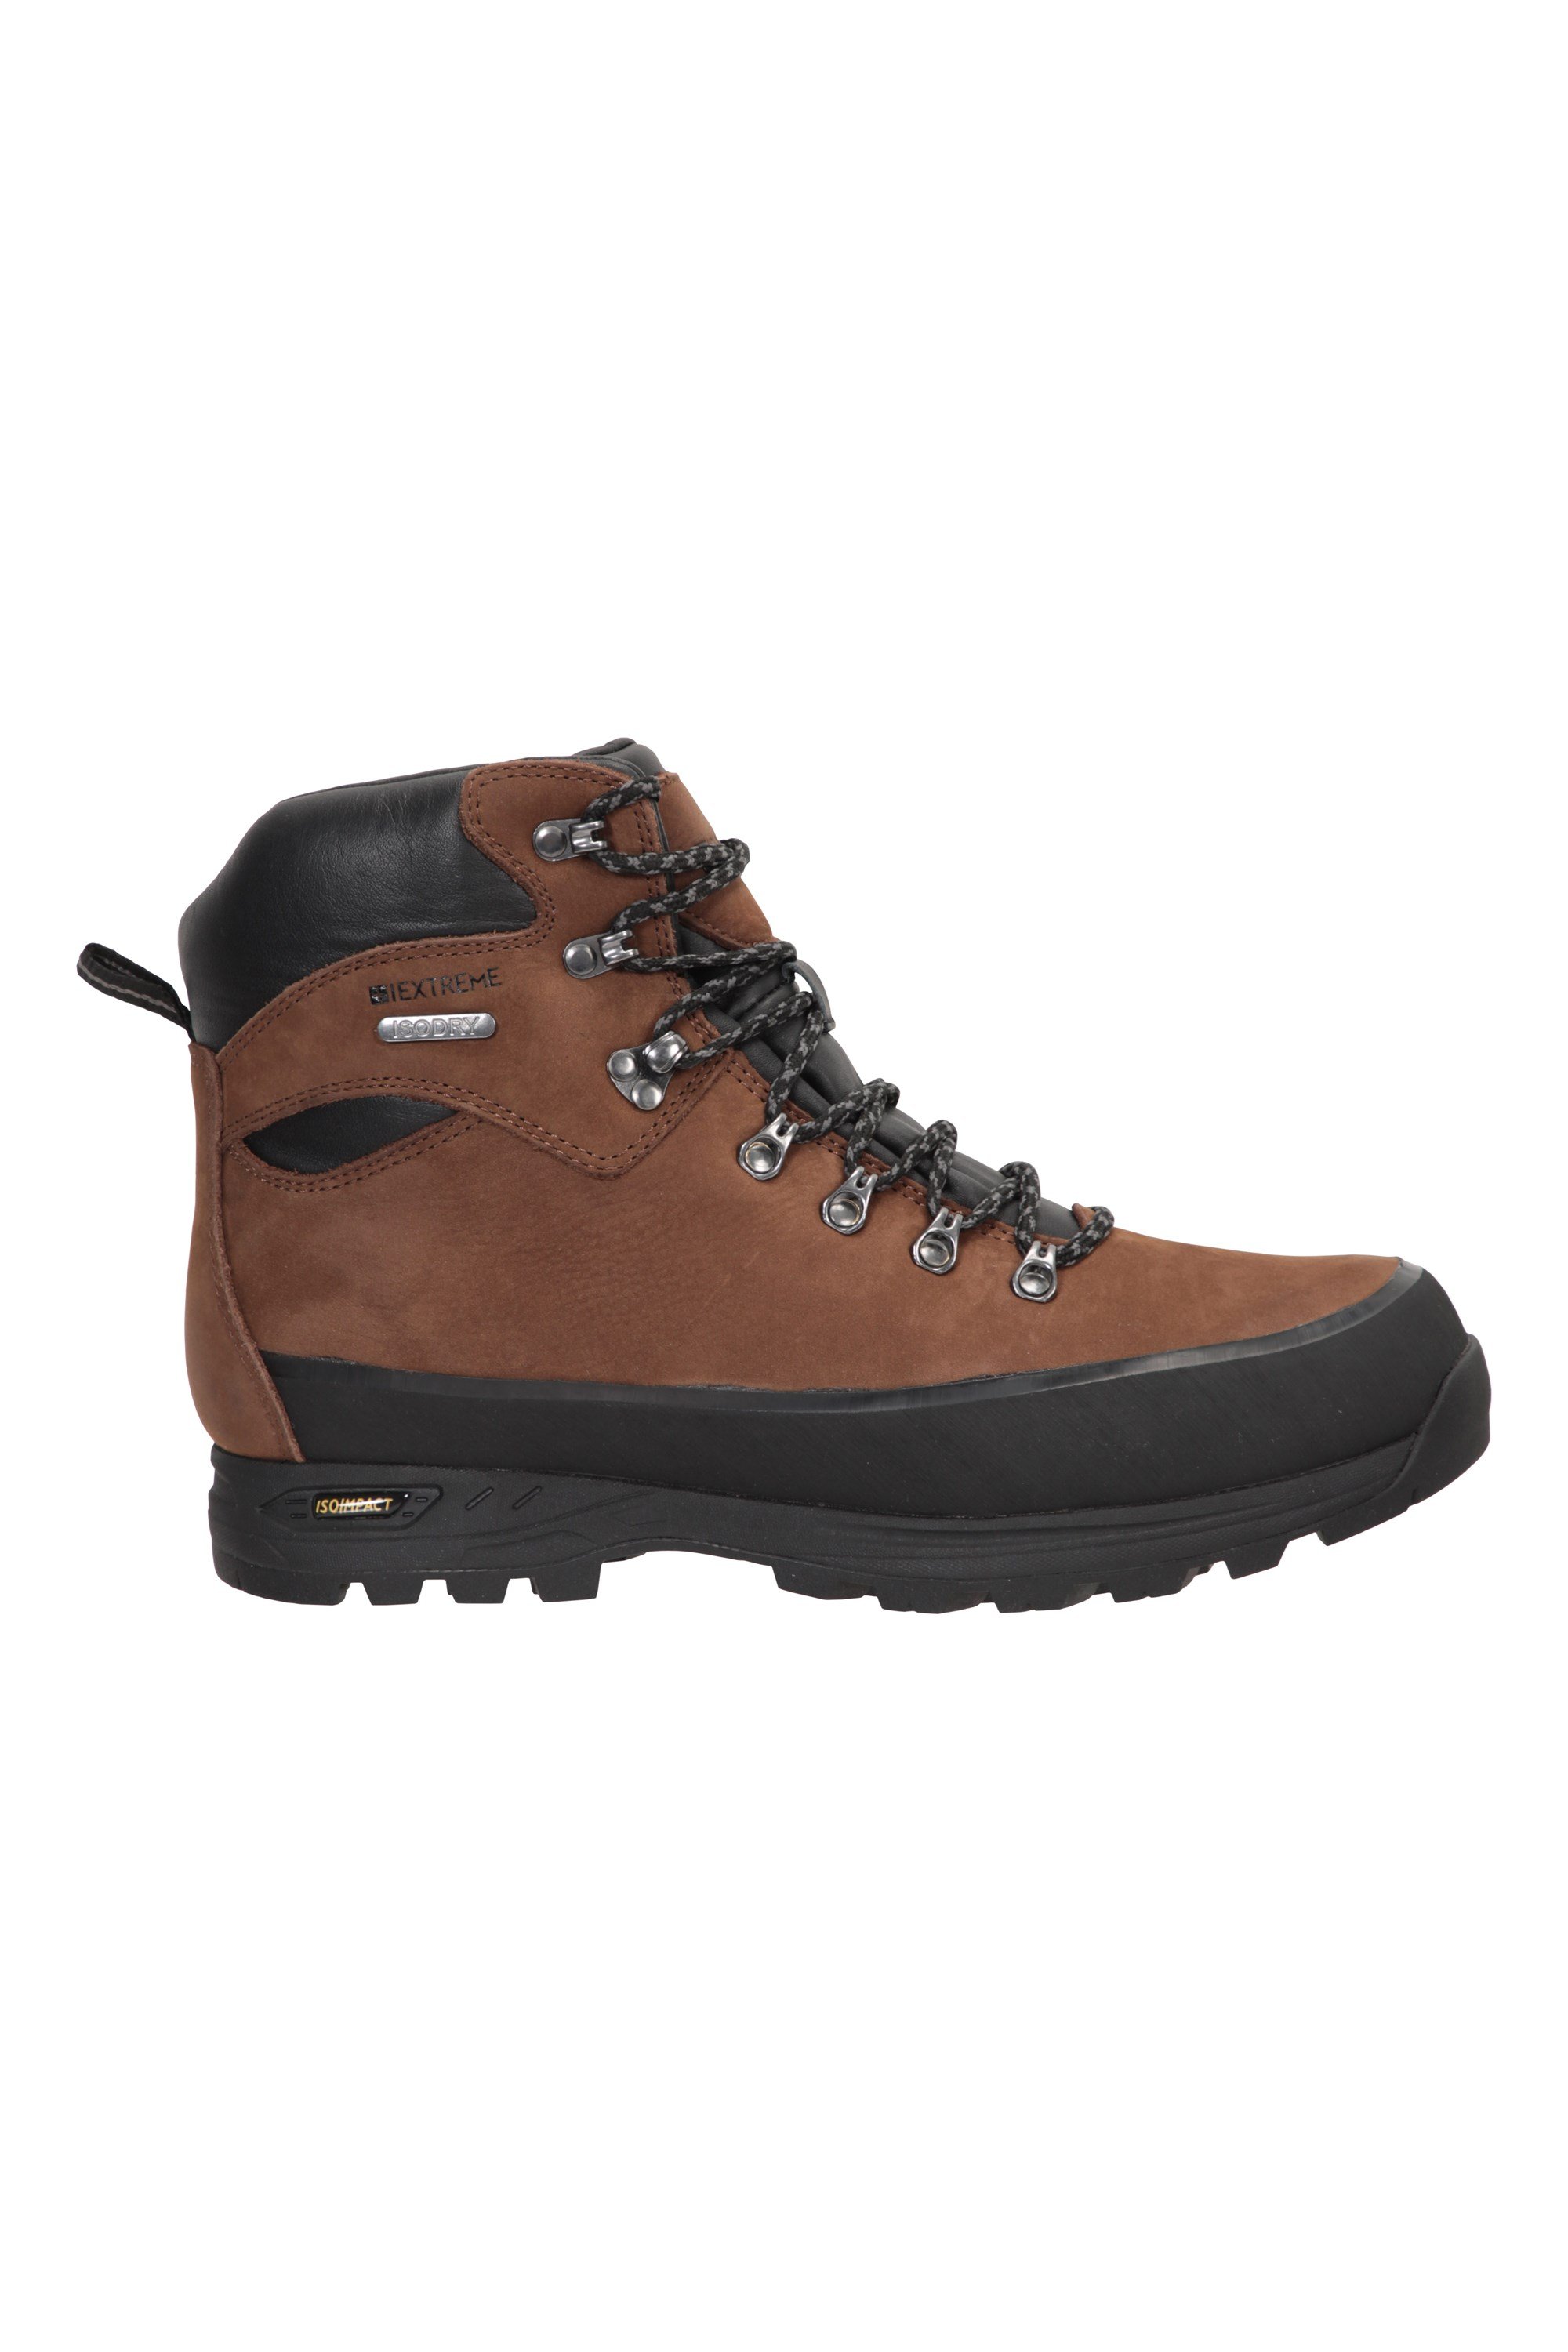 Quest Mens IsoGrip Leather Waterproof Hiking Boots - Brown